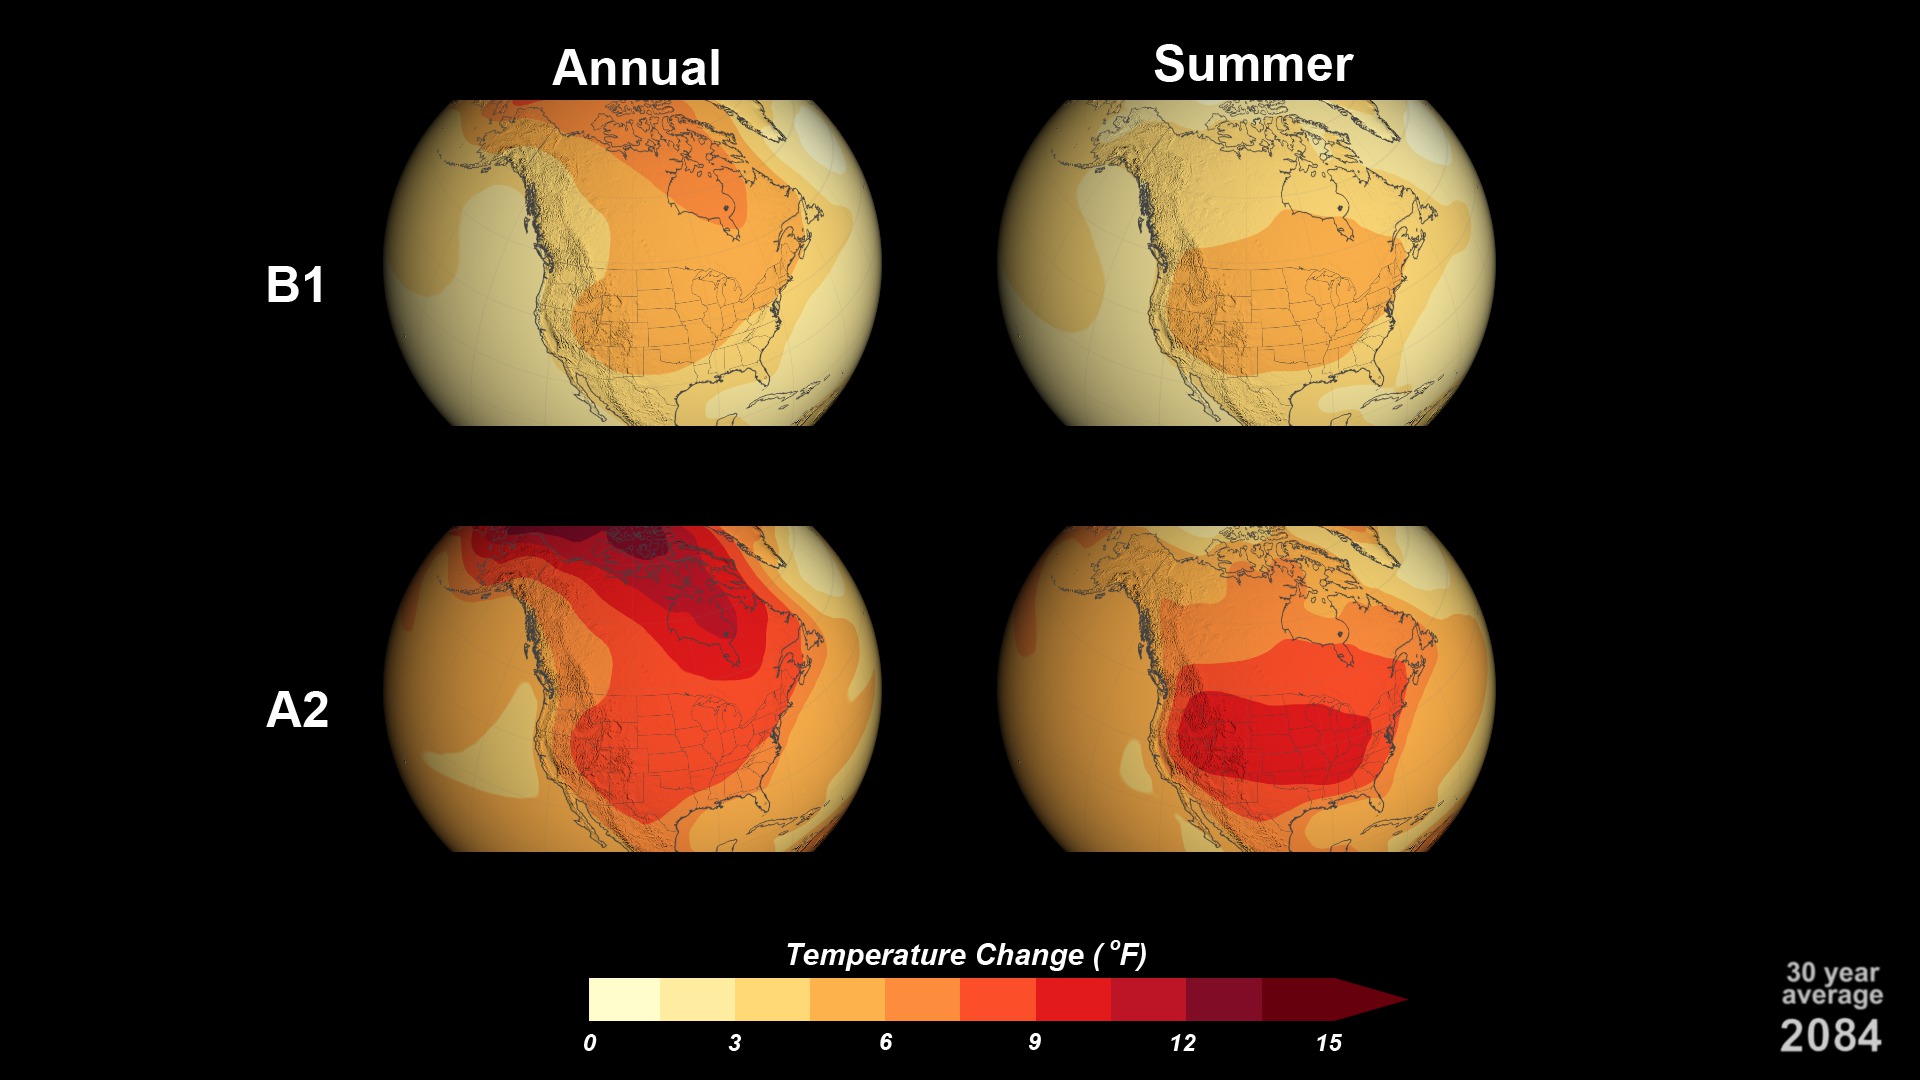 Mosaic of annual and summer temperature visualizations